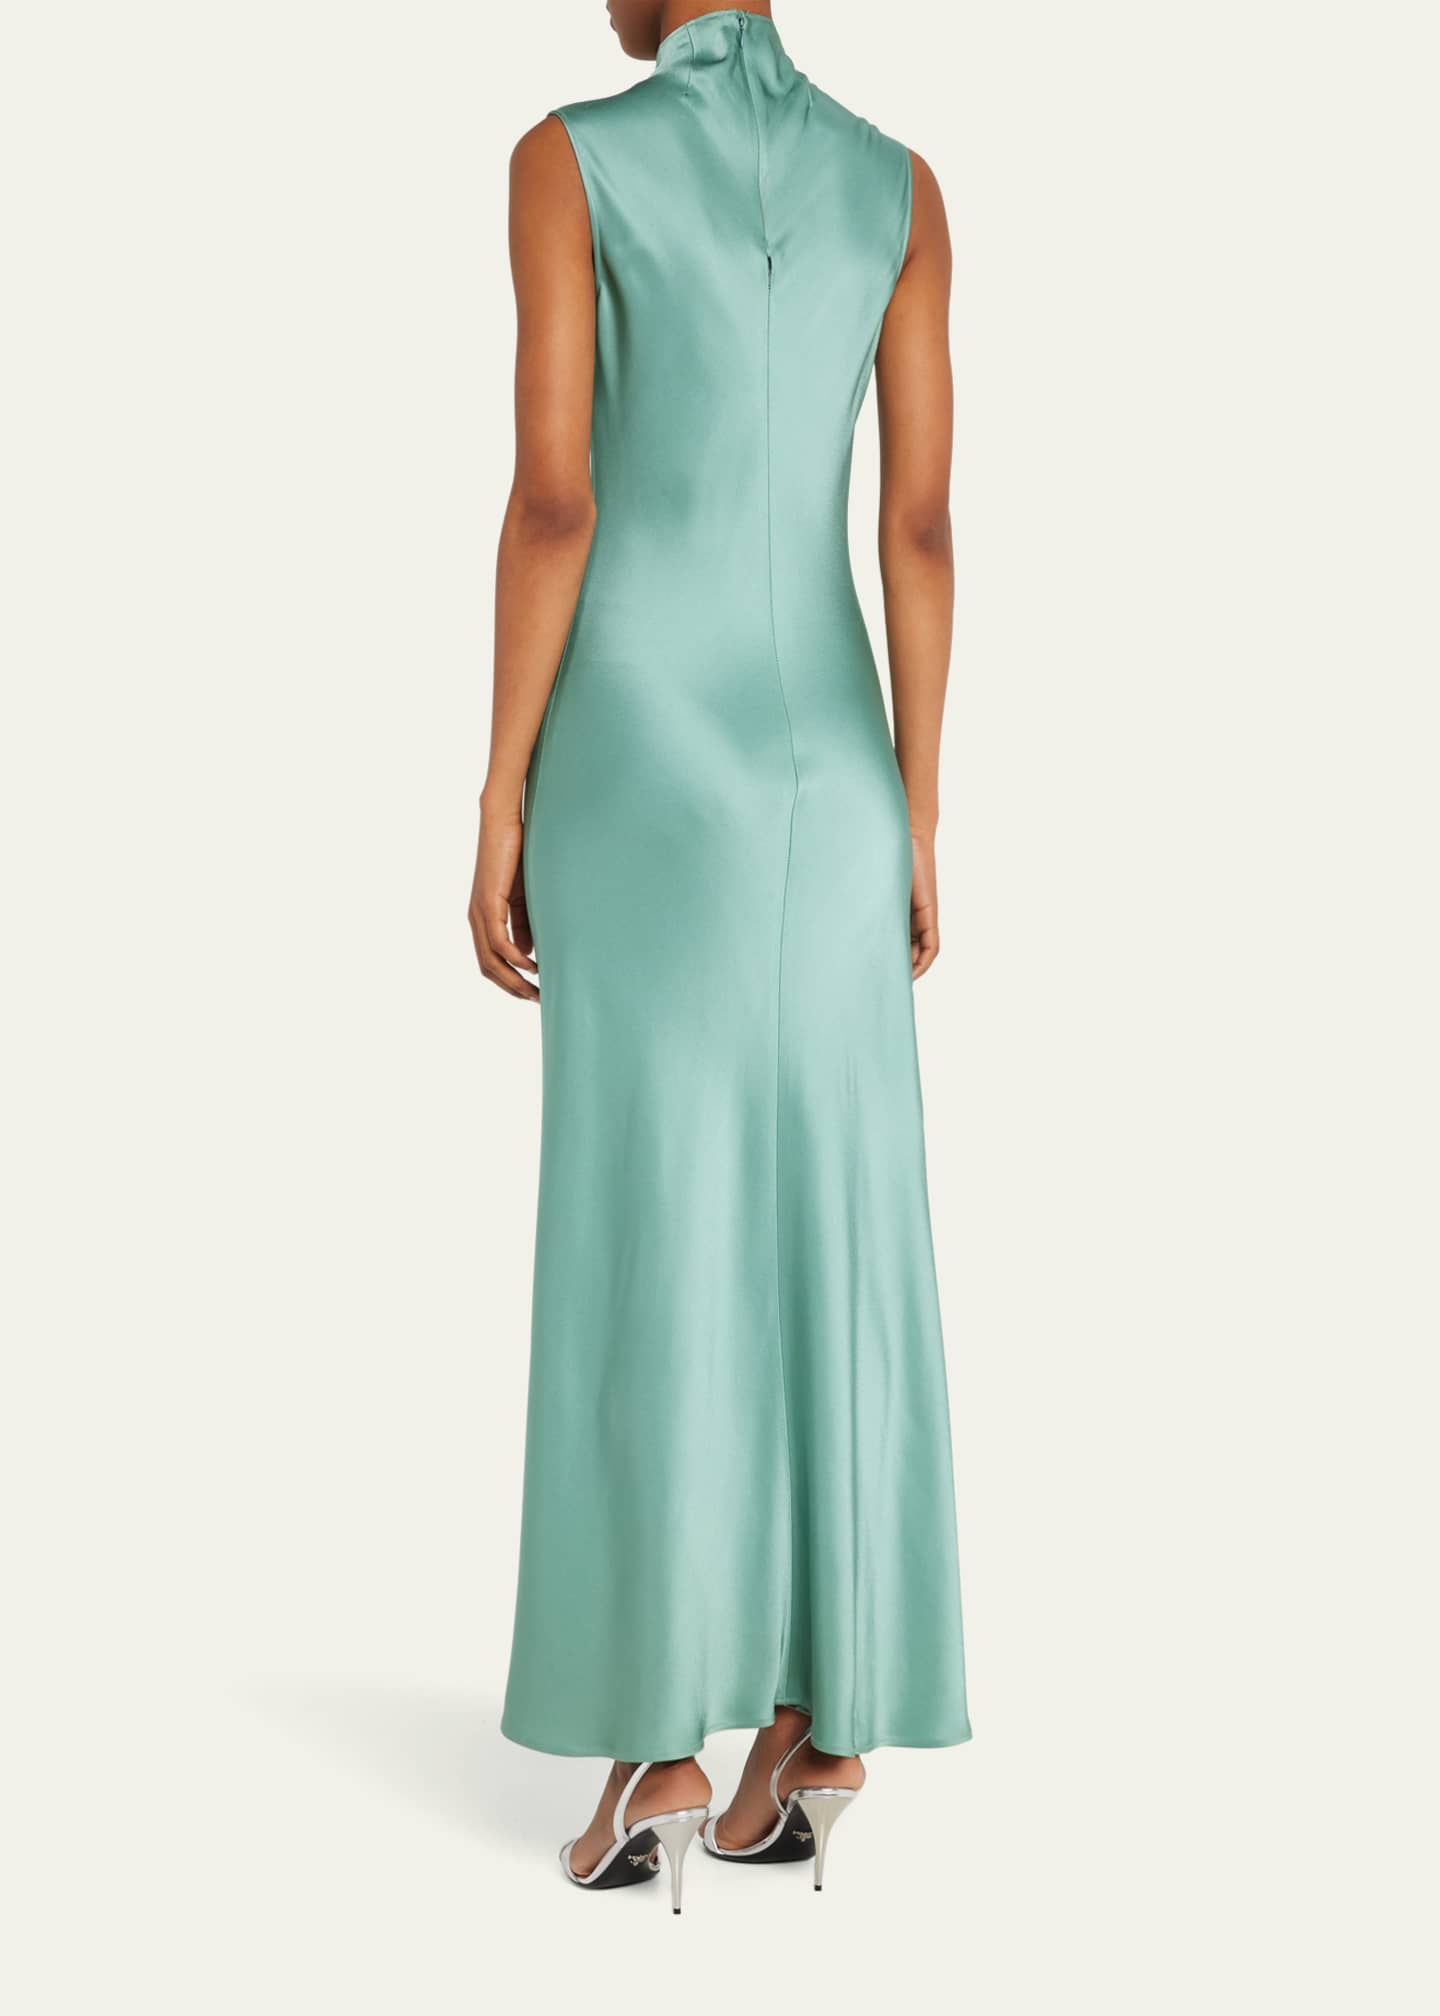 LAPOINTE Double-Face Satin Cocktail Dress with Drape Neck - Bergdorf ...